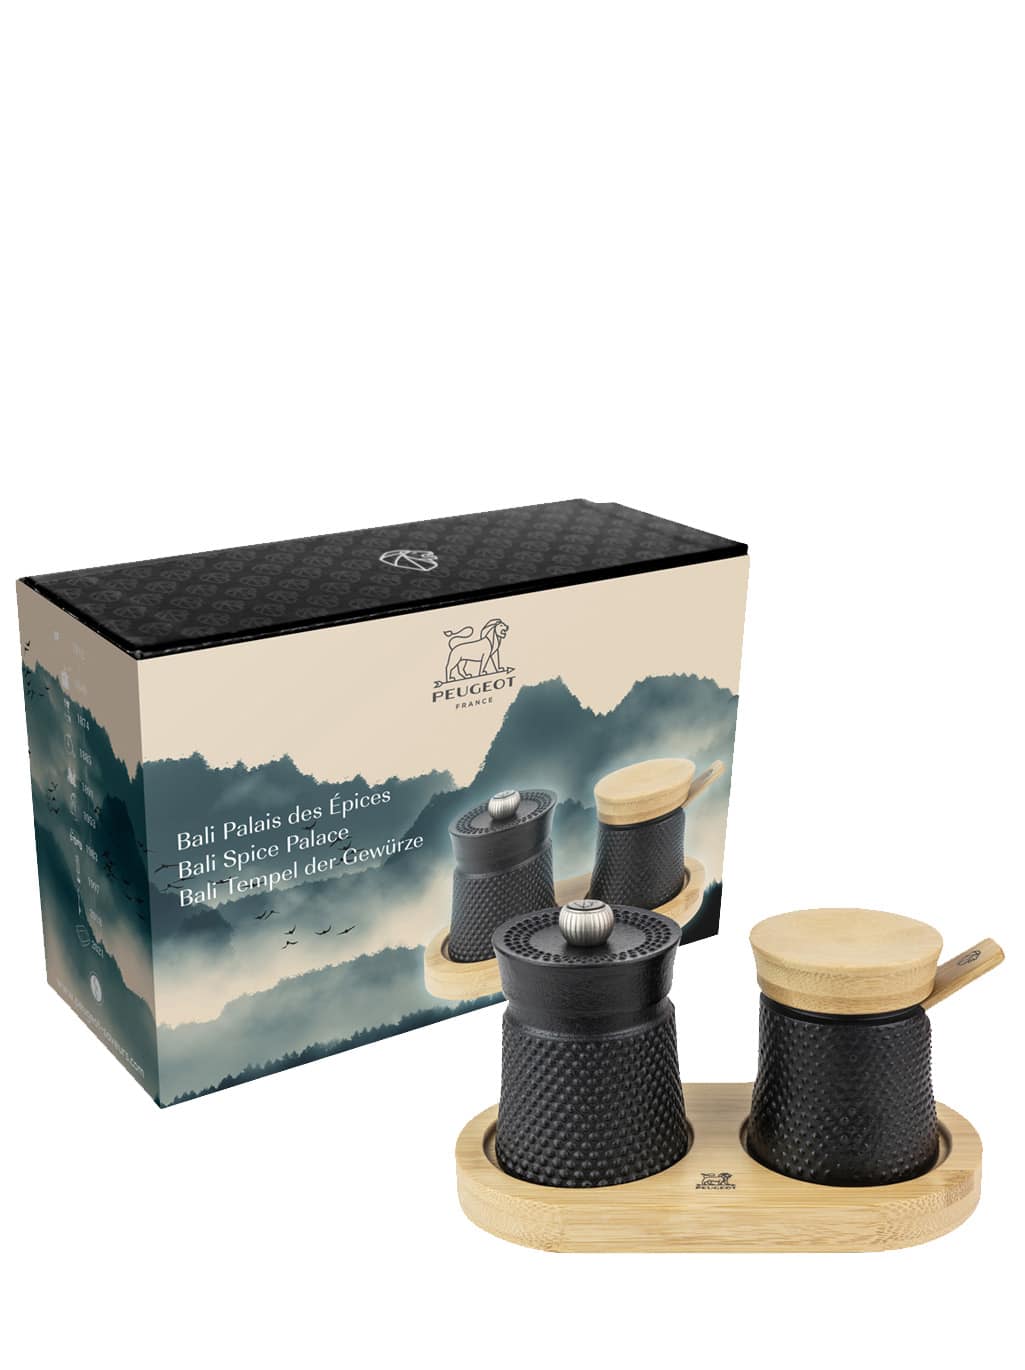 Image of Bali Black Cast-Iron Pepper Mill and its Salt Cellar as a Gift Box Bali Spice Palace